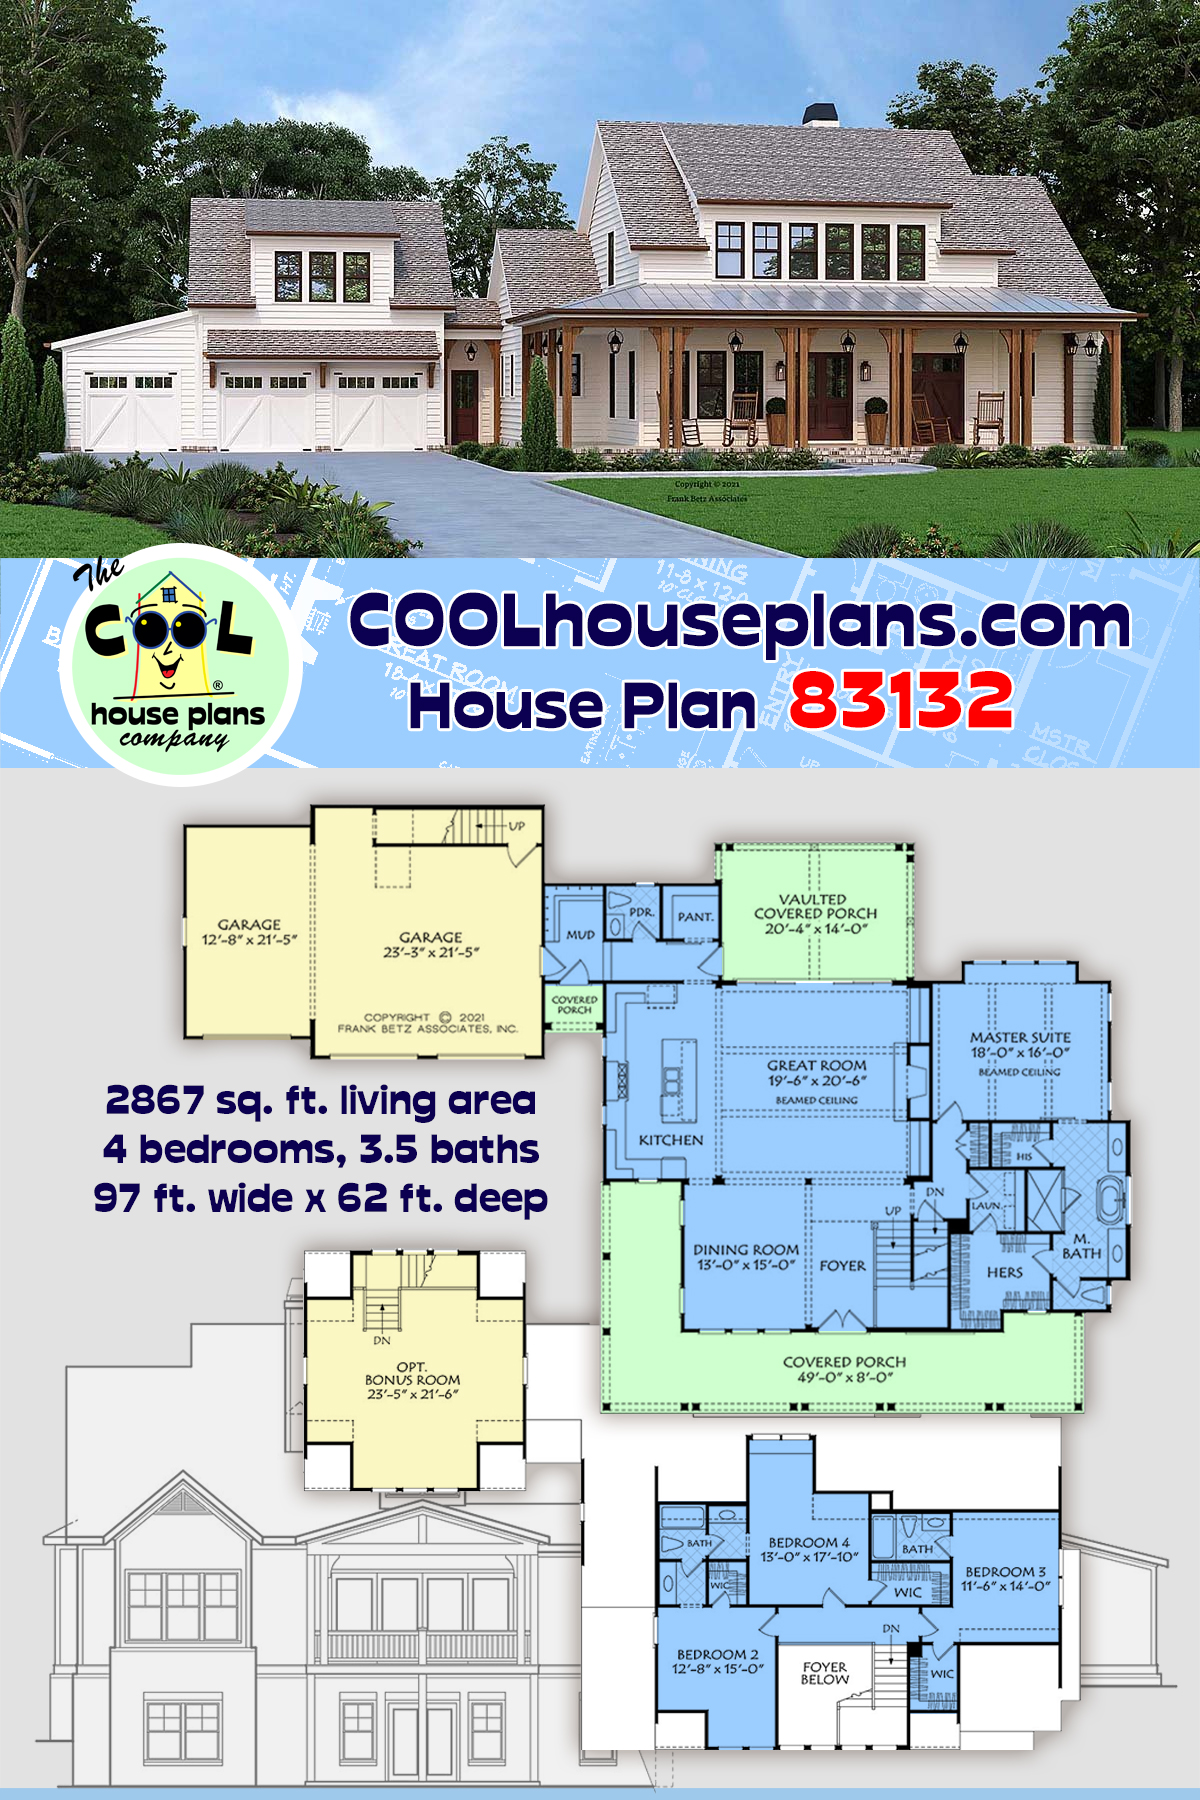 Cottage, Farmhouse, Traditional House Plan 83132 with 4 Beds, 4 Baths, 3 Car Garage